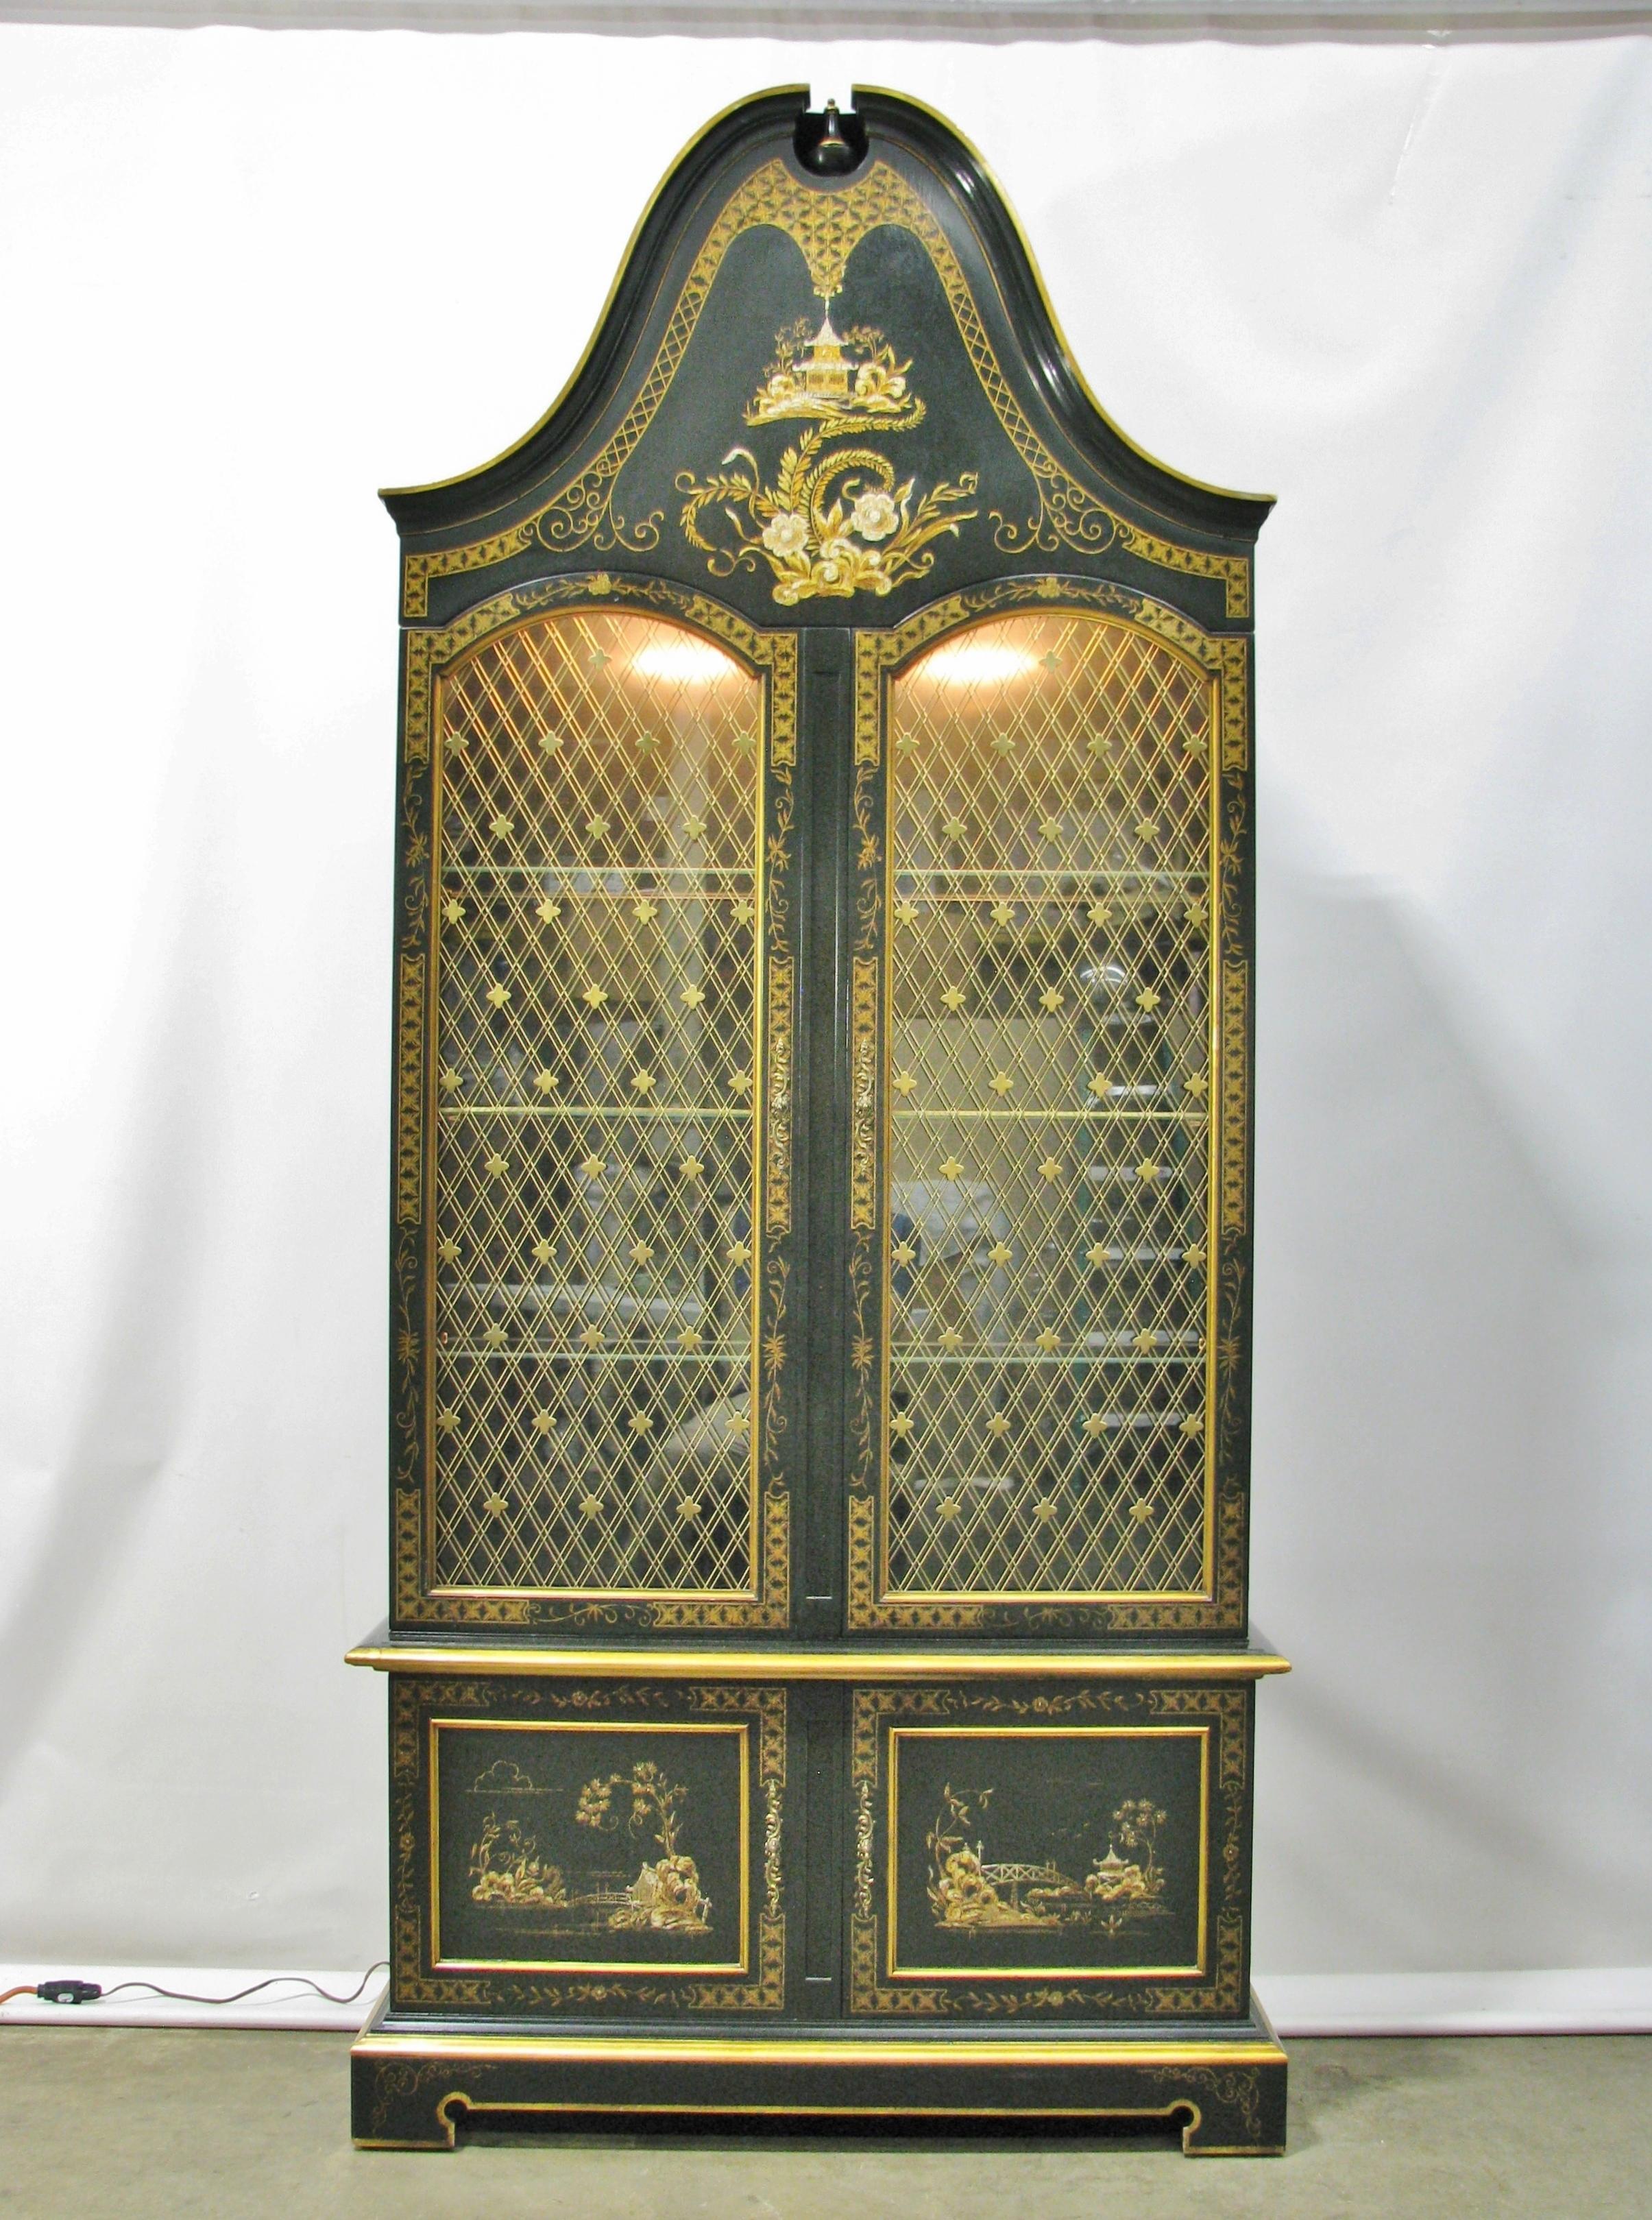 Chinoiserie display cabinet by luxury furniture brand John Widdicomb. This 2 piece cabinet is in excellent, clean original finish and condition. It features arched dome bonnet top, gloss lacquered finish with Asian-inspired painted scenes with